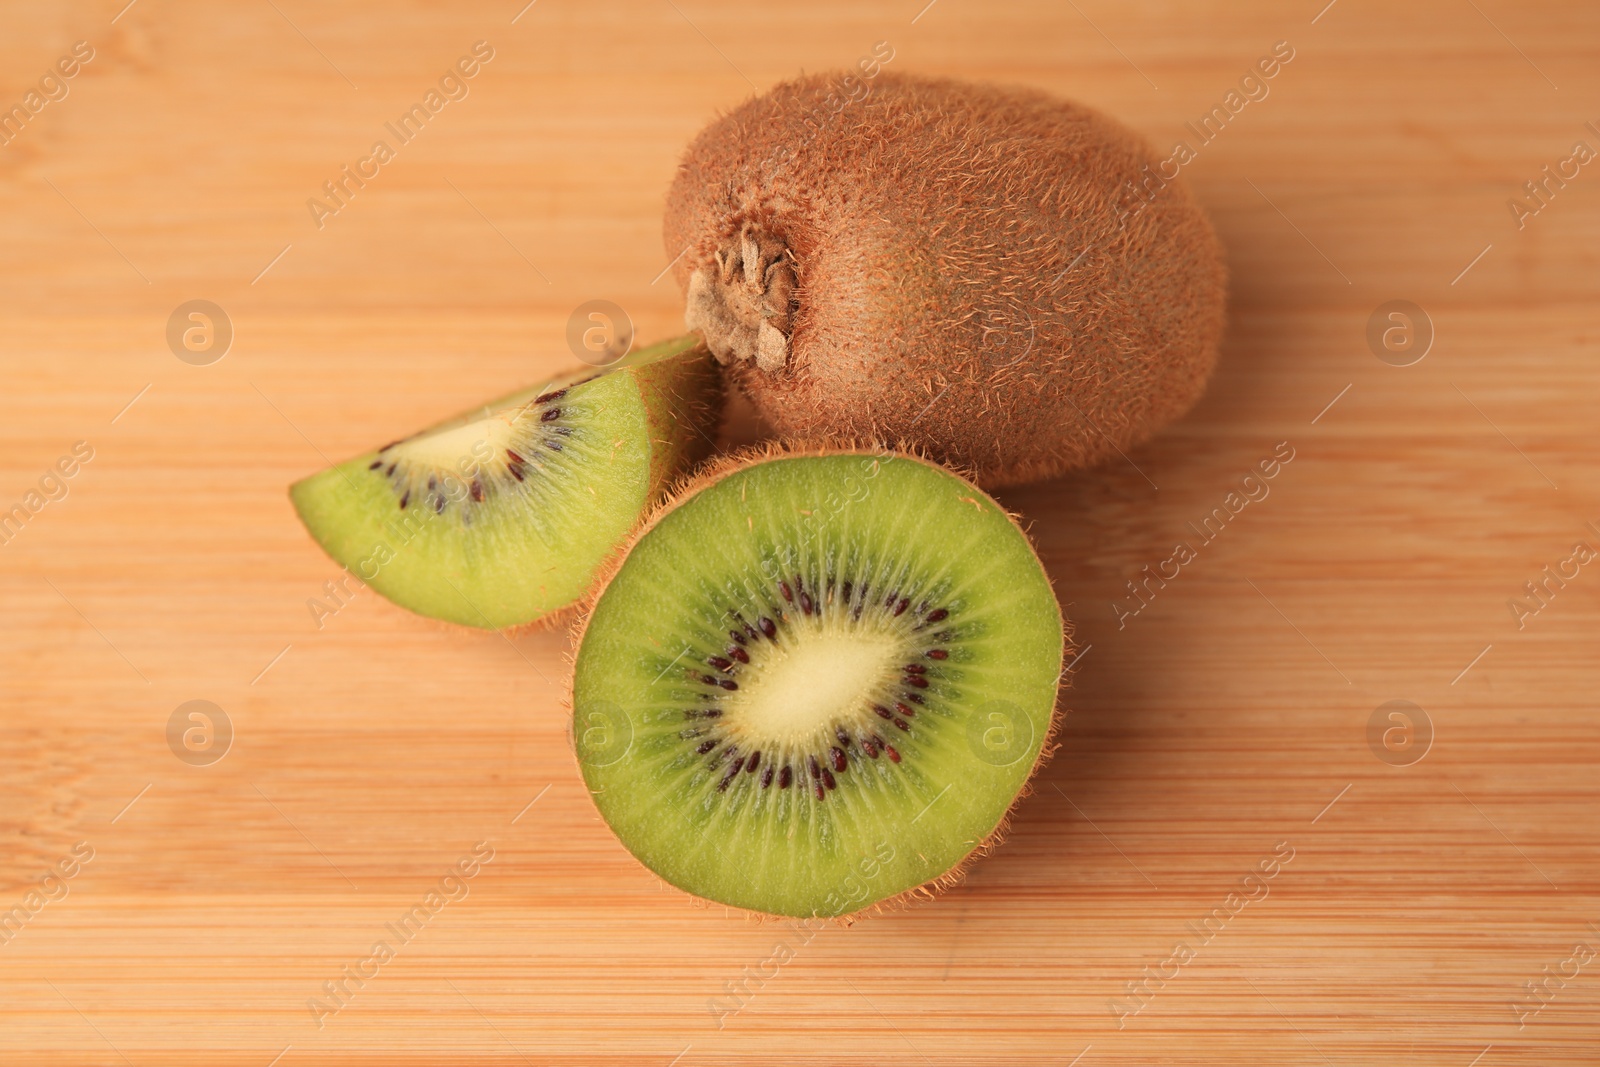 Photo of Whole and cut kiwis on wooden table, closeup